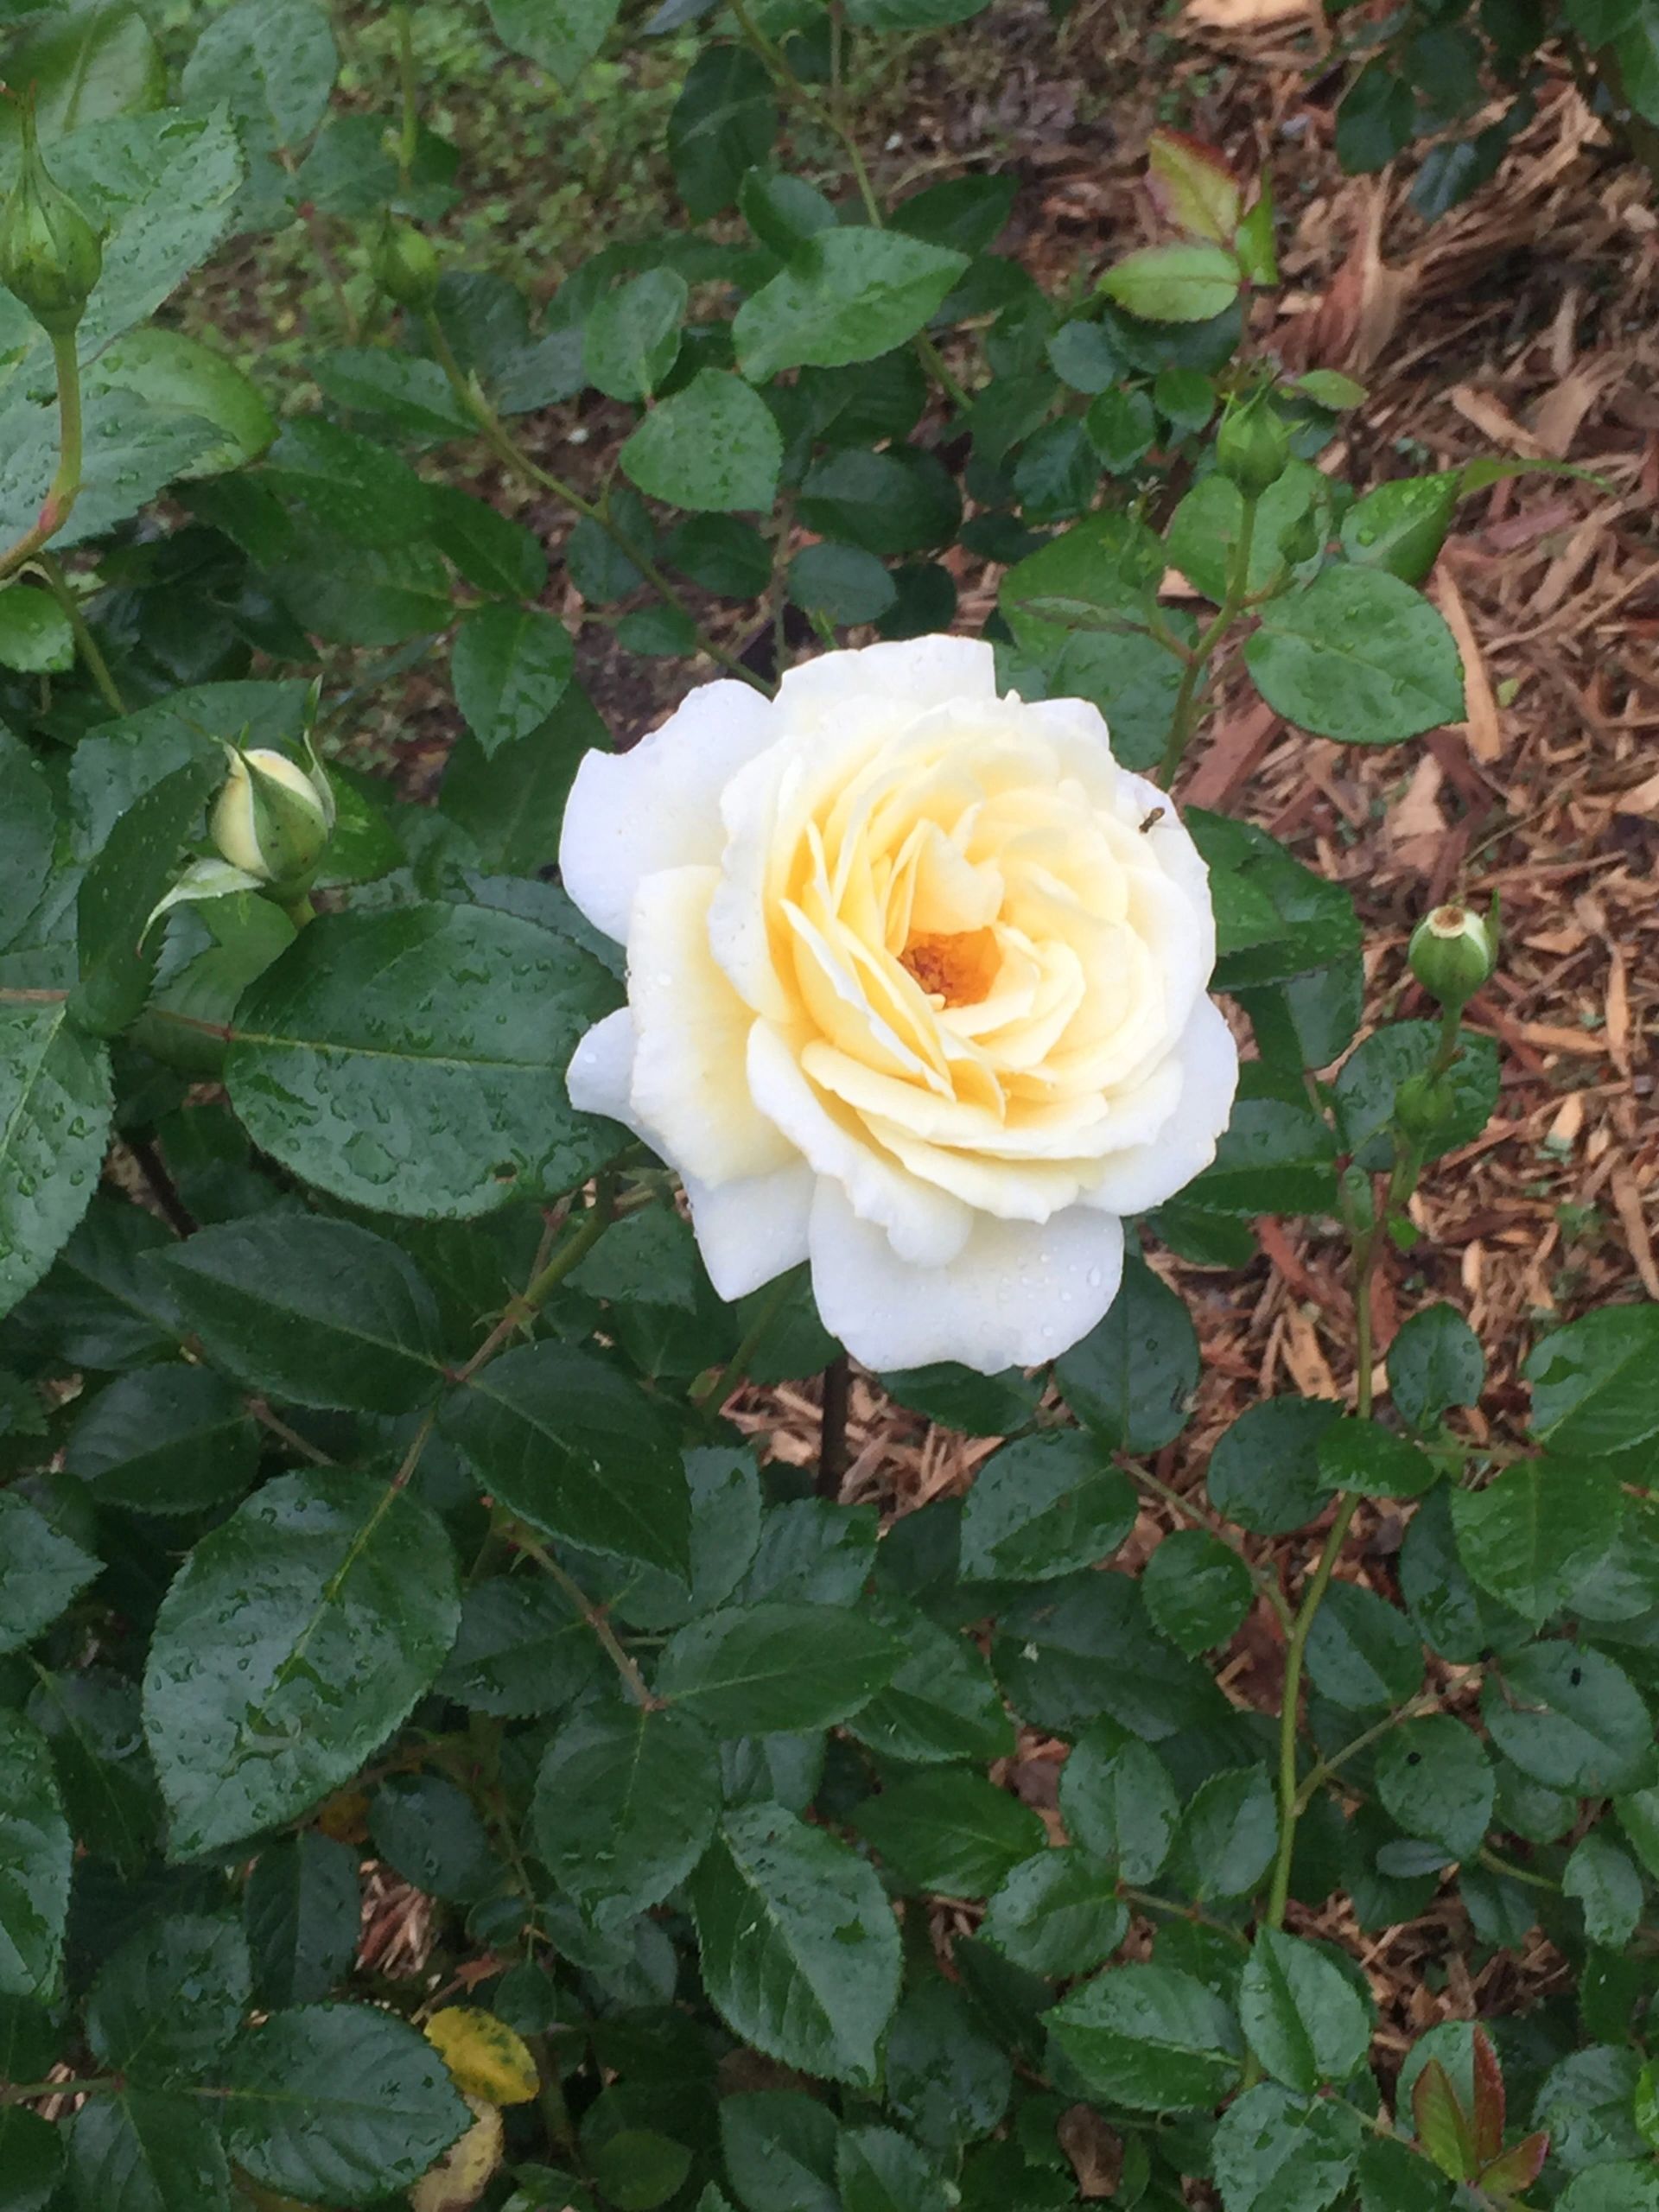 A beautiful picture of a white and yellow rose